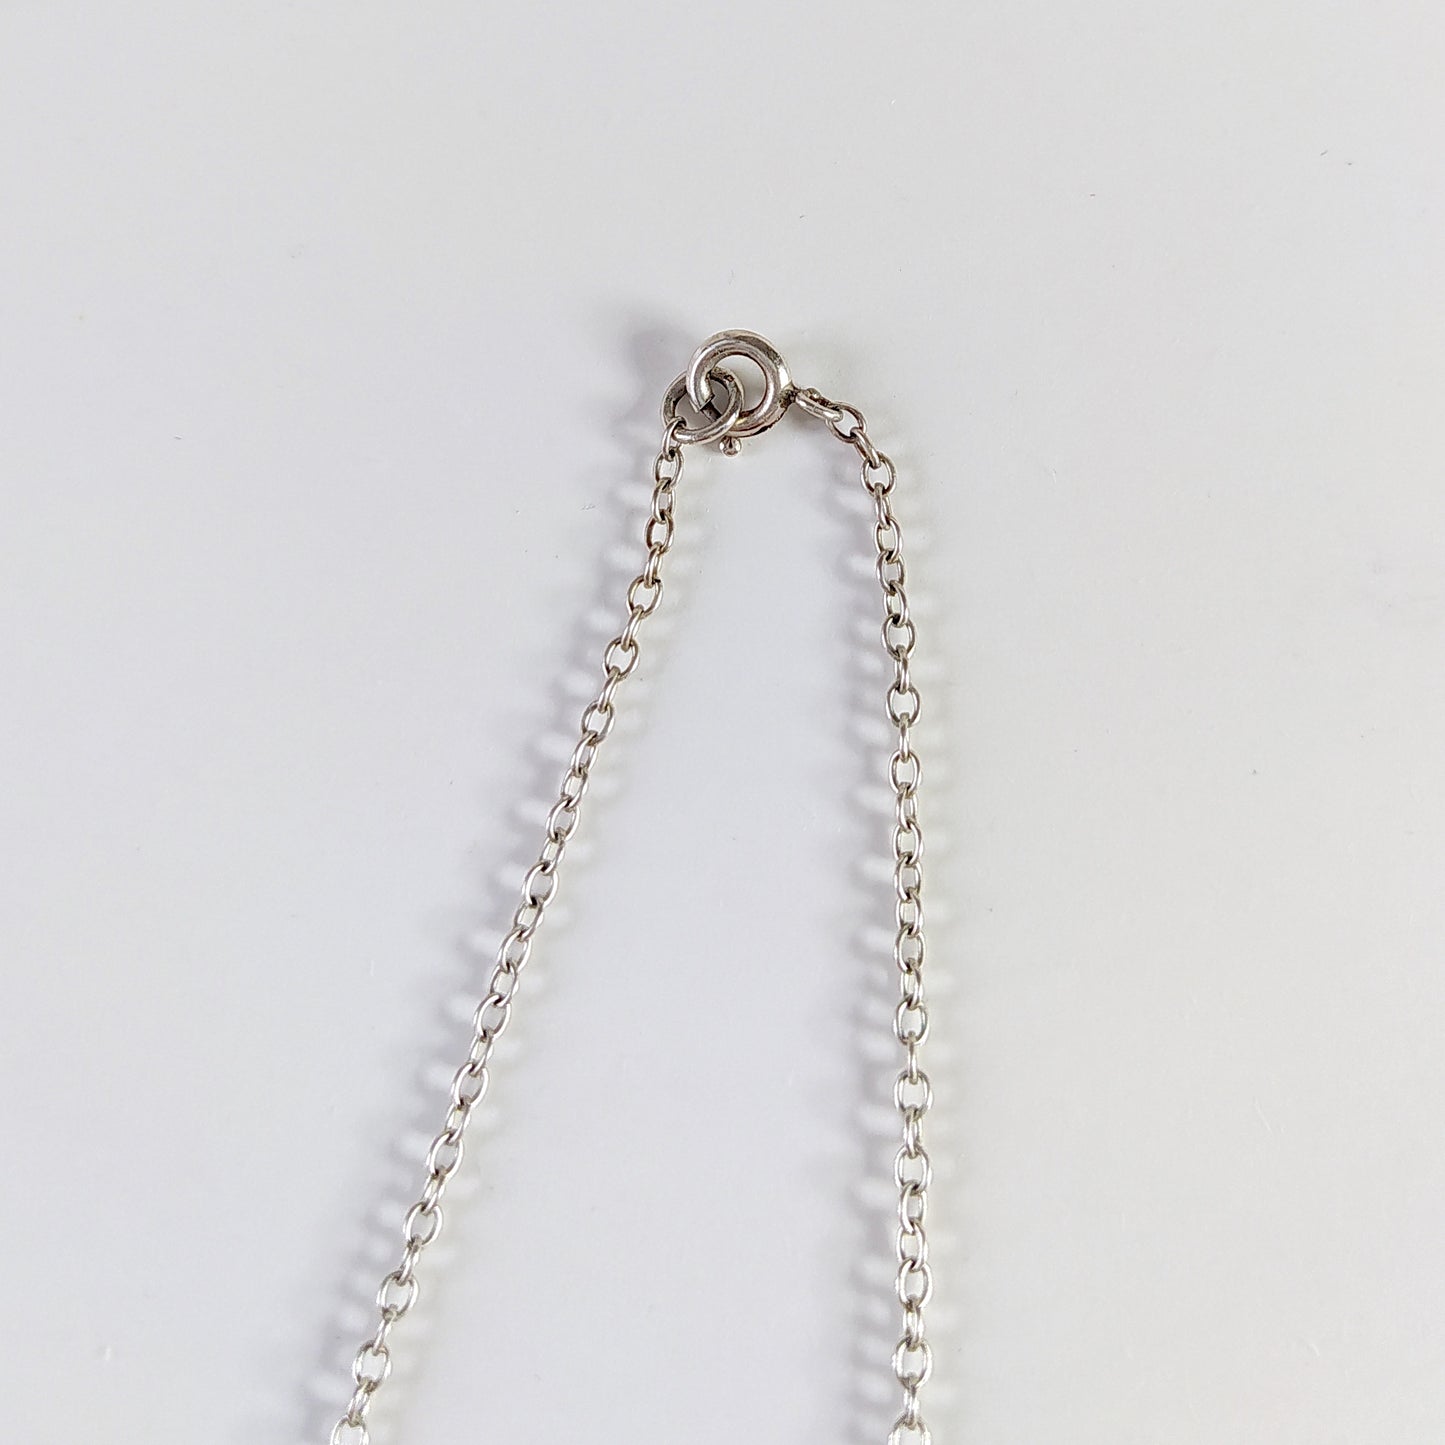 Rene | twisted circle pendant on dainty necklace